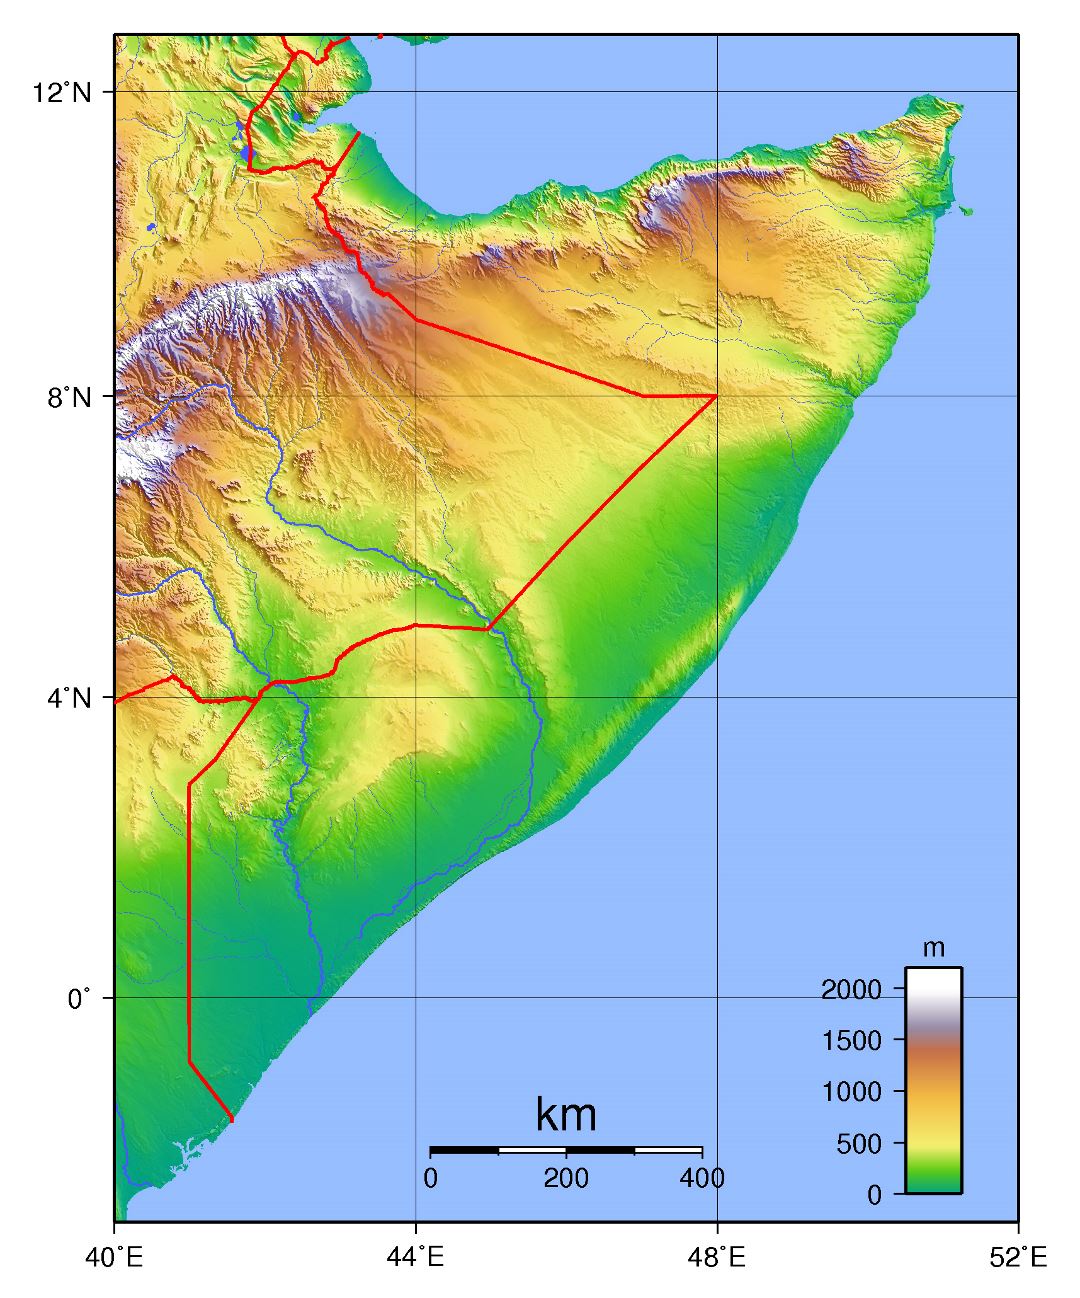 Large topographical map of Somalia